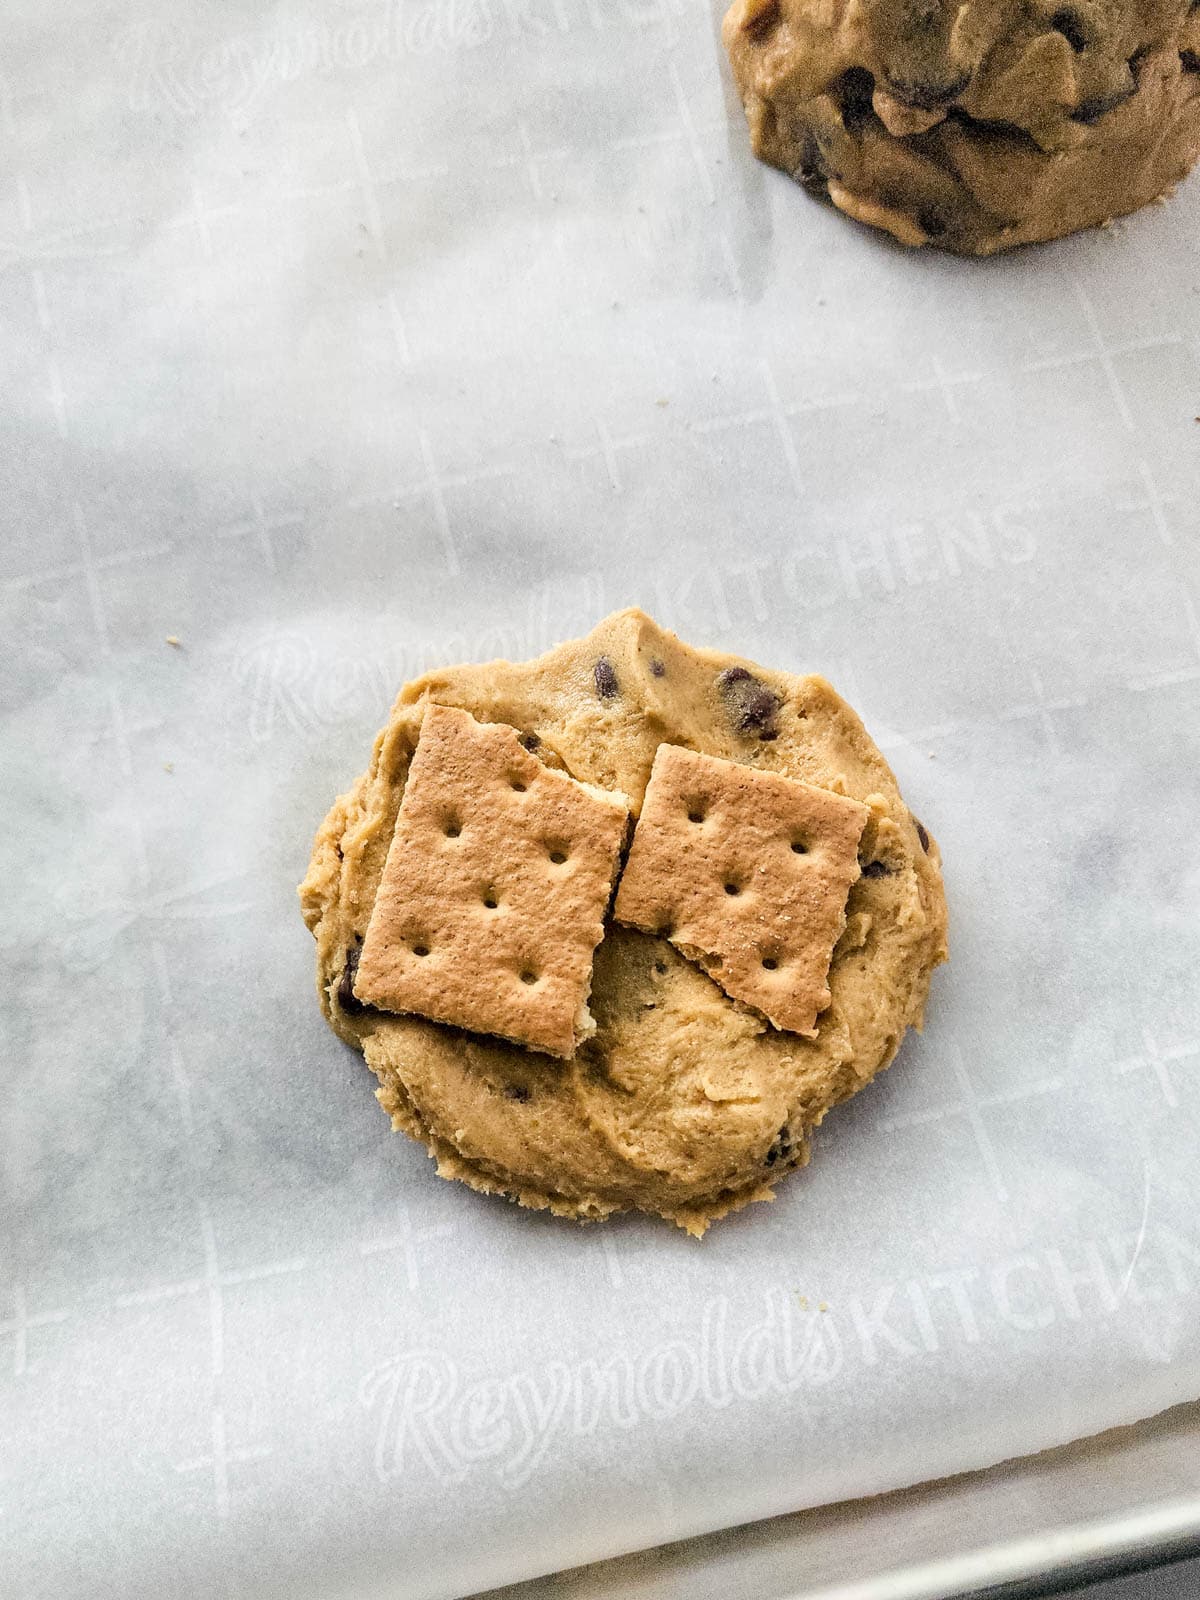 Graham crackers on top of cookie dough